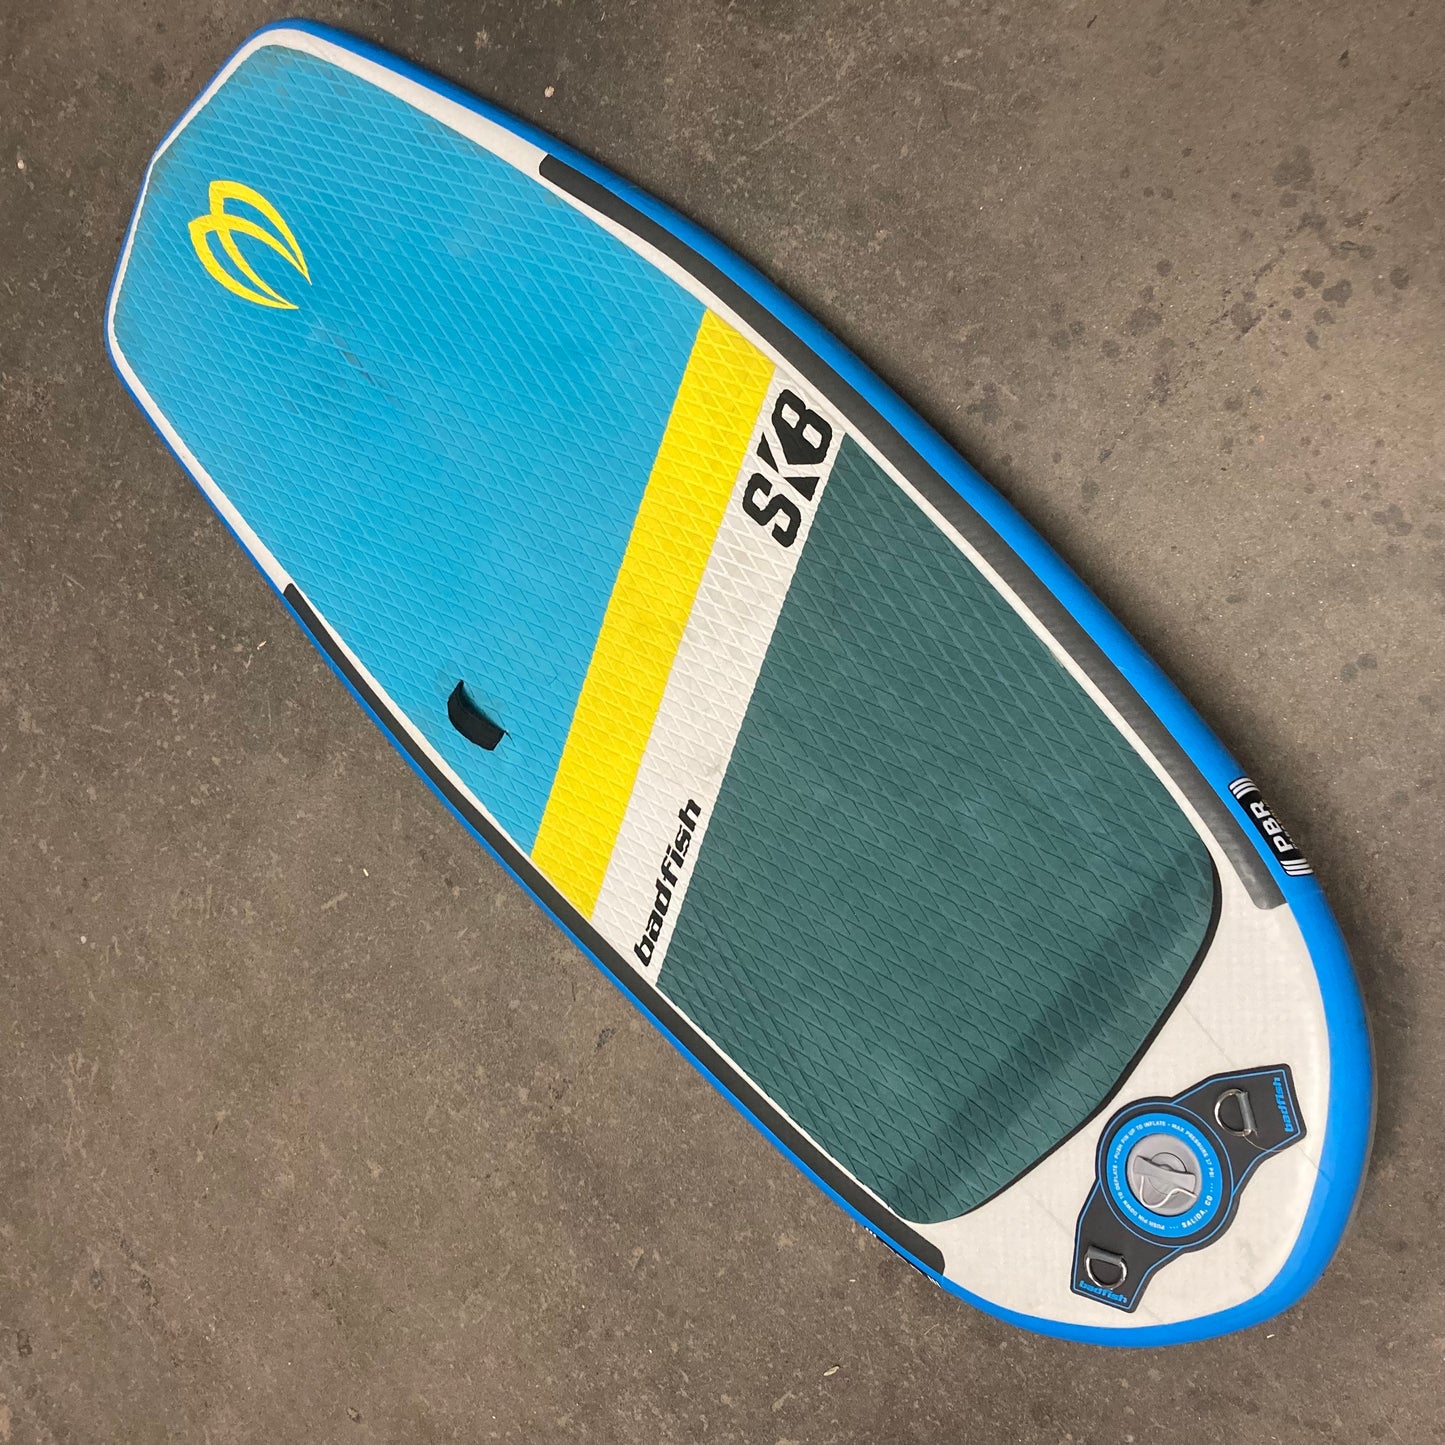 A Badfish Demo ISK8 stand up paddle board on a concrete floor.